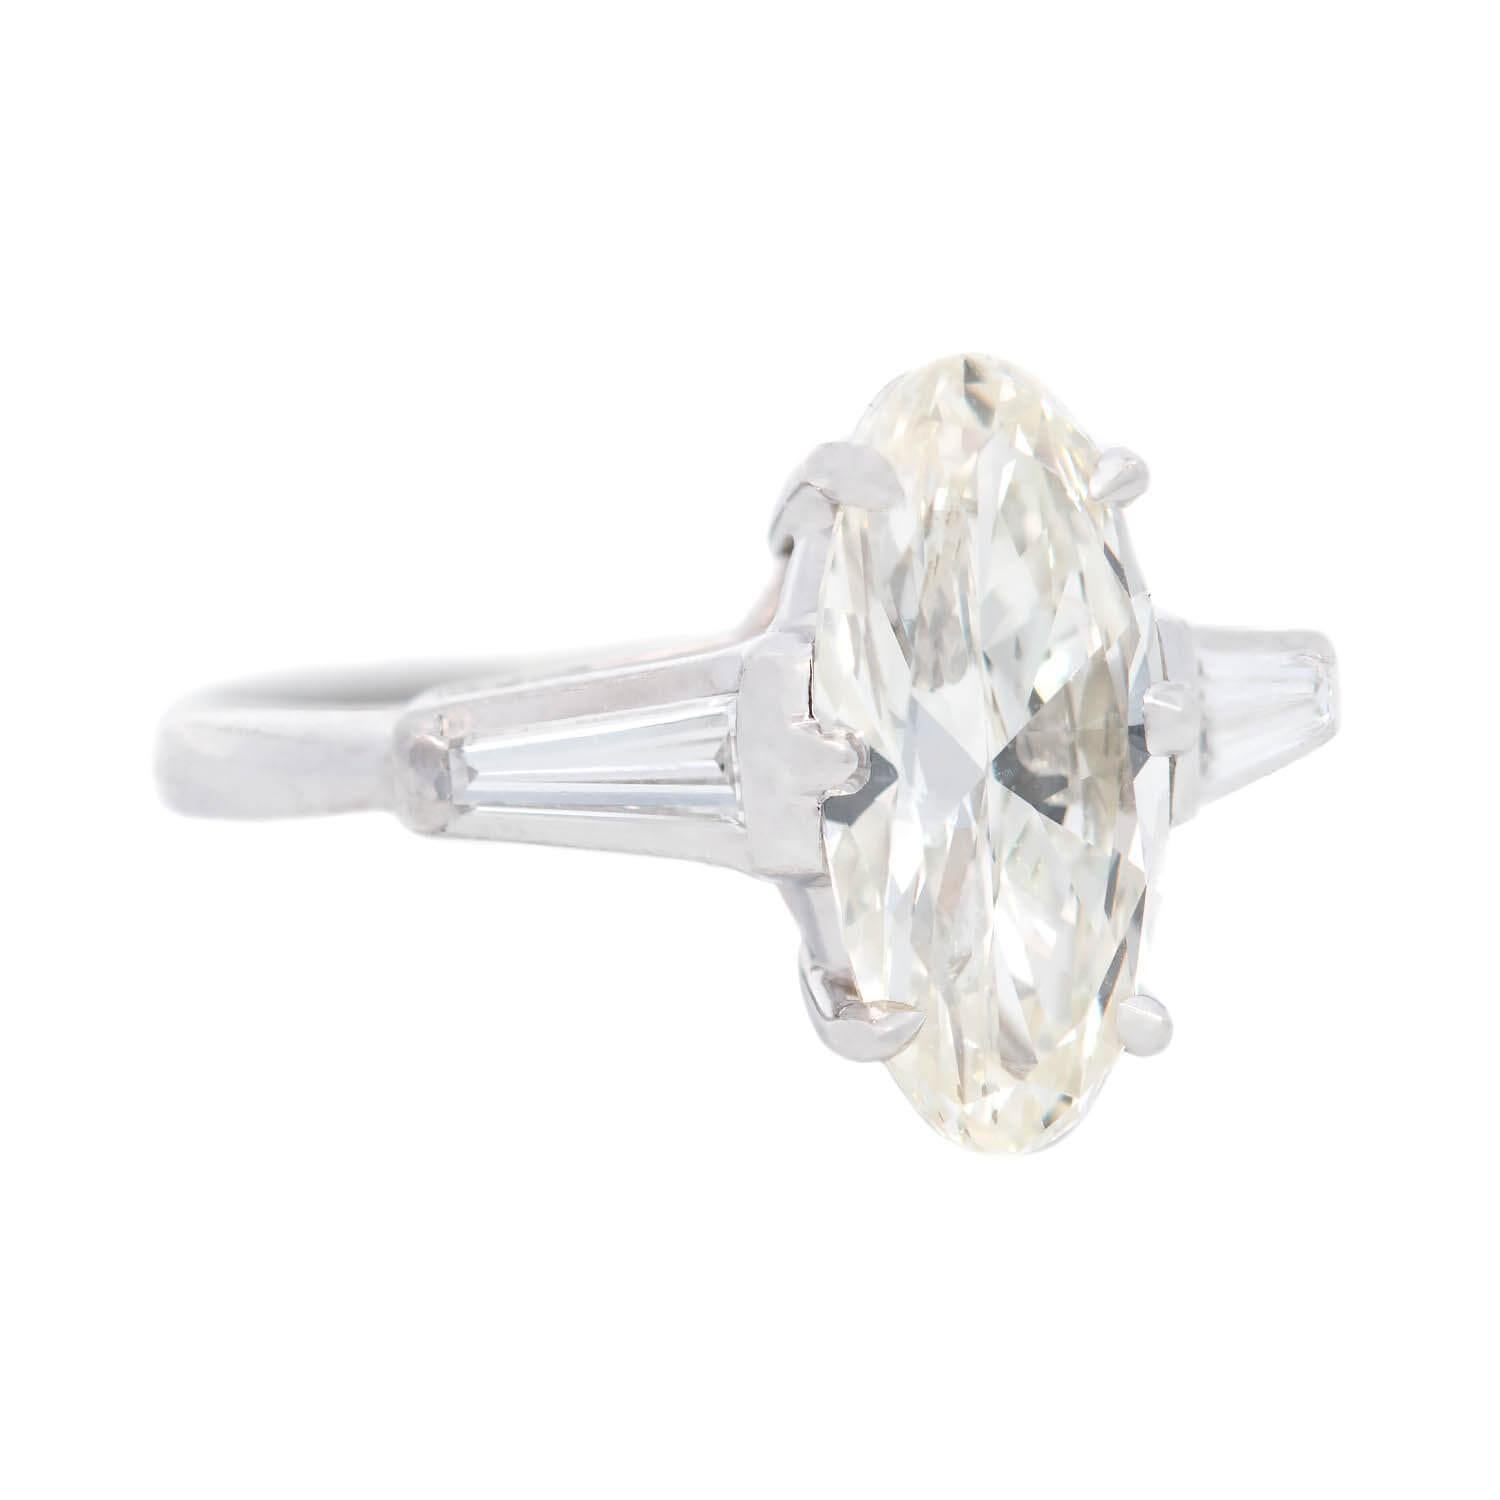 A simply outstanding diamond engagement ring from the Vintage (ca1960) era! This beautiful piece is crafted in platinum and holds a gorgeous moval cut, a type of modified marquise cut, diamond at the center. The diamond, which is prong set, has J/K